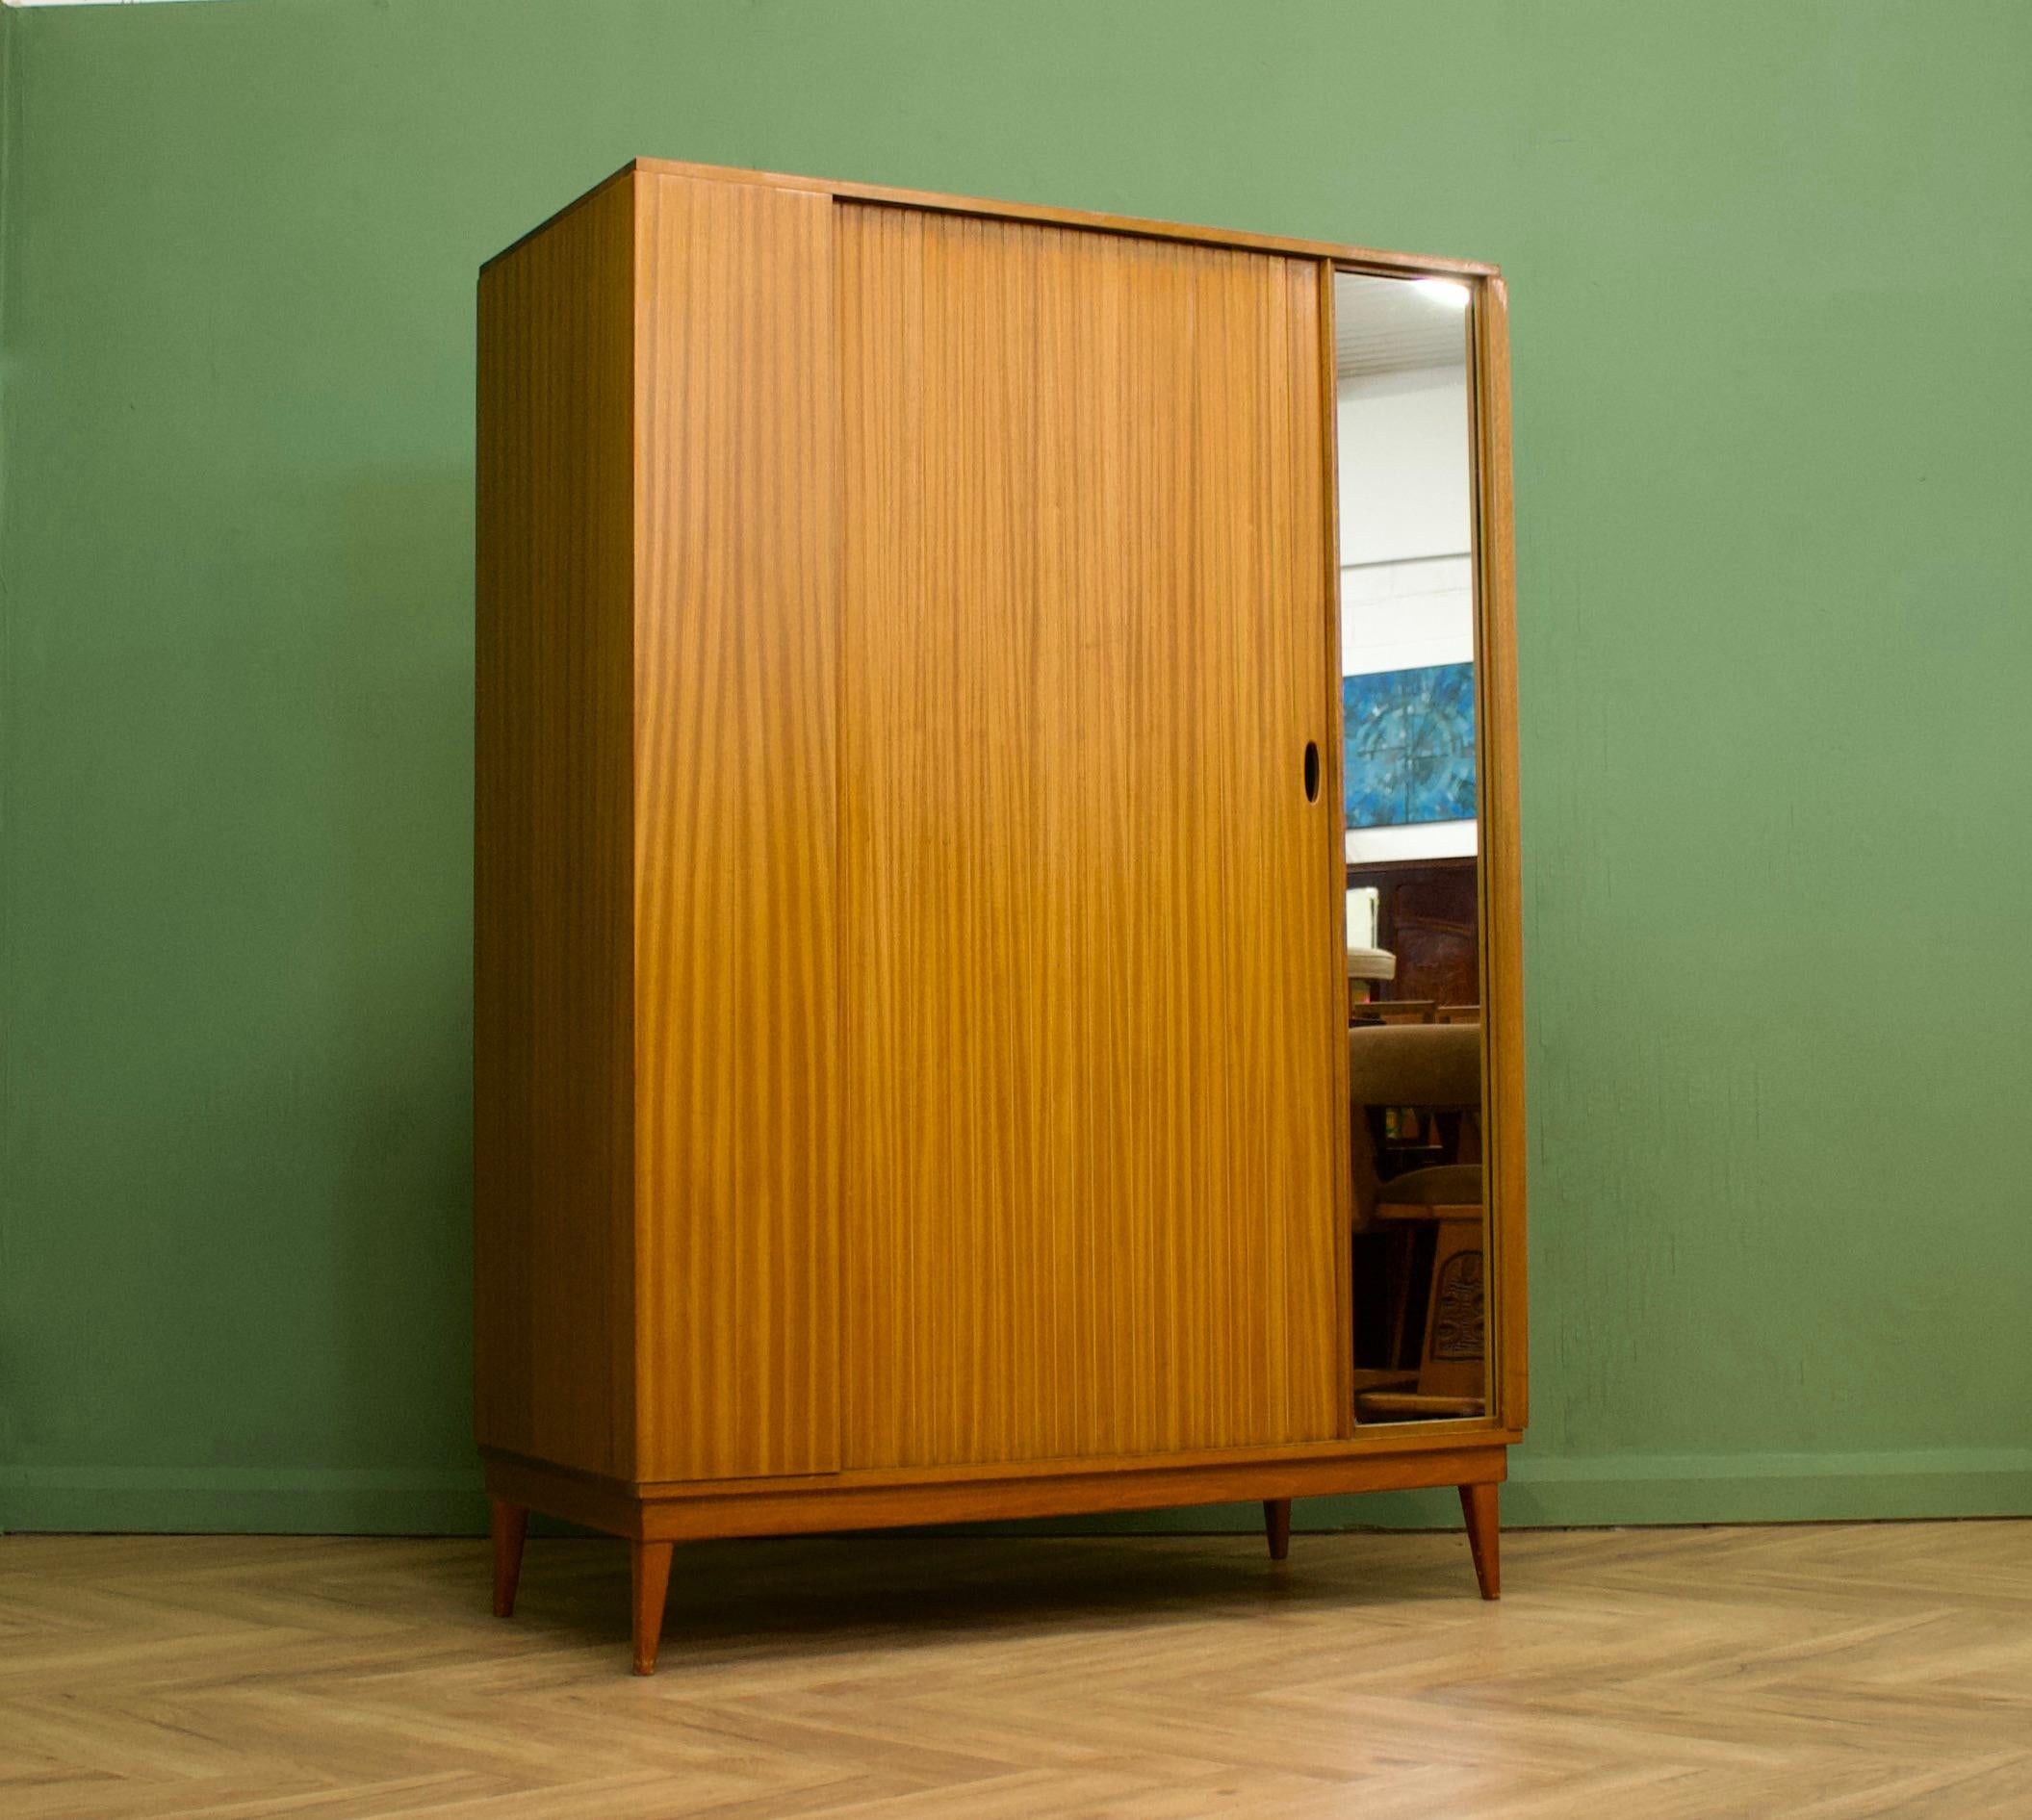 A freestanding teak wardrobe from Austinsuite - standing on stylish tapered splayed legs
These Austinsuite wardrobes have a unique design feature of a sliding tambour door - which runs very smooth
There's an external full length mirror - internally